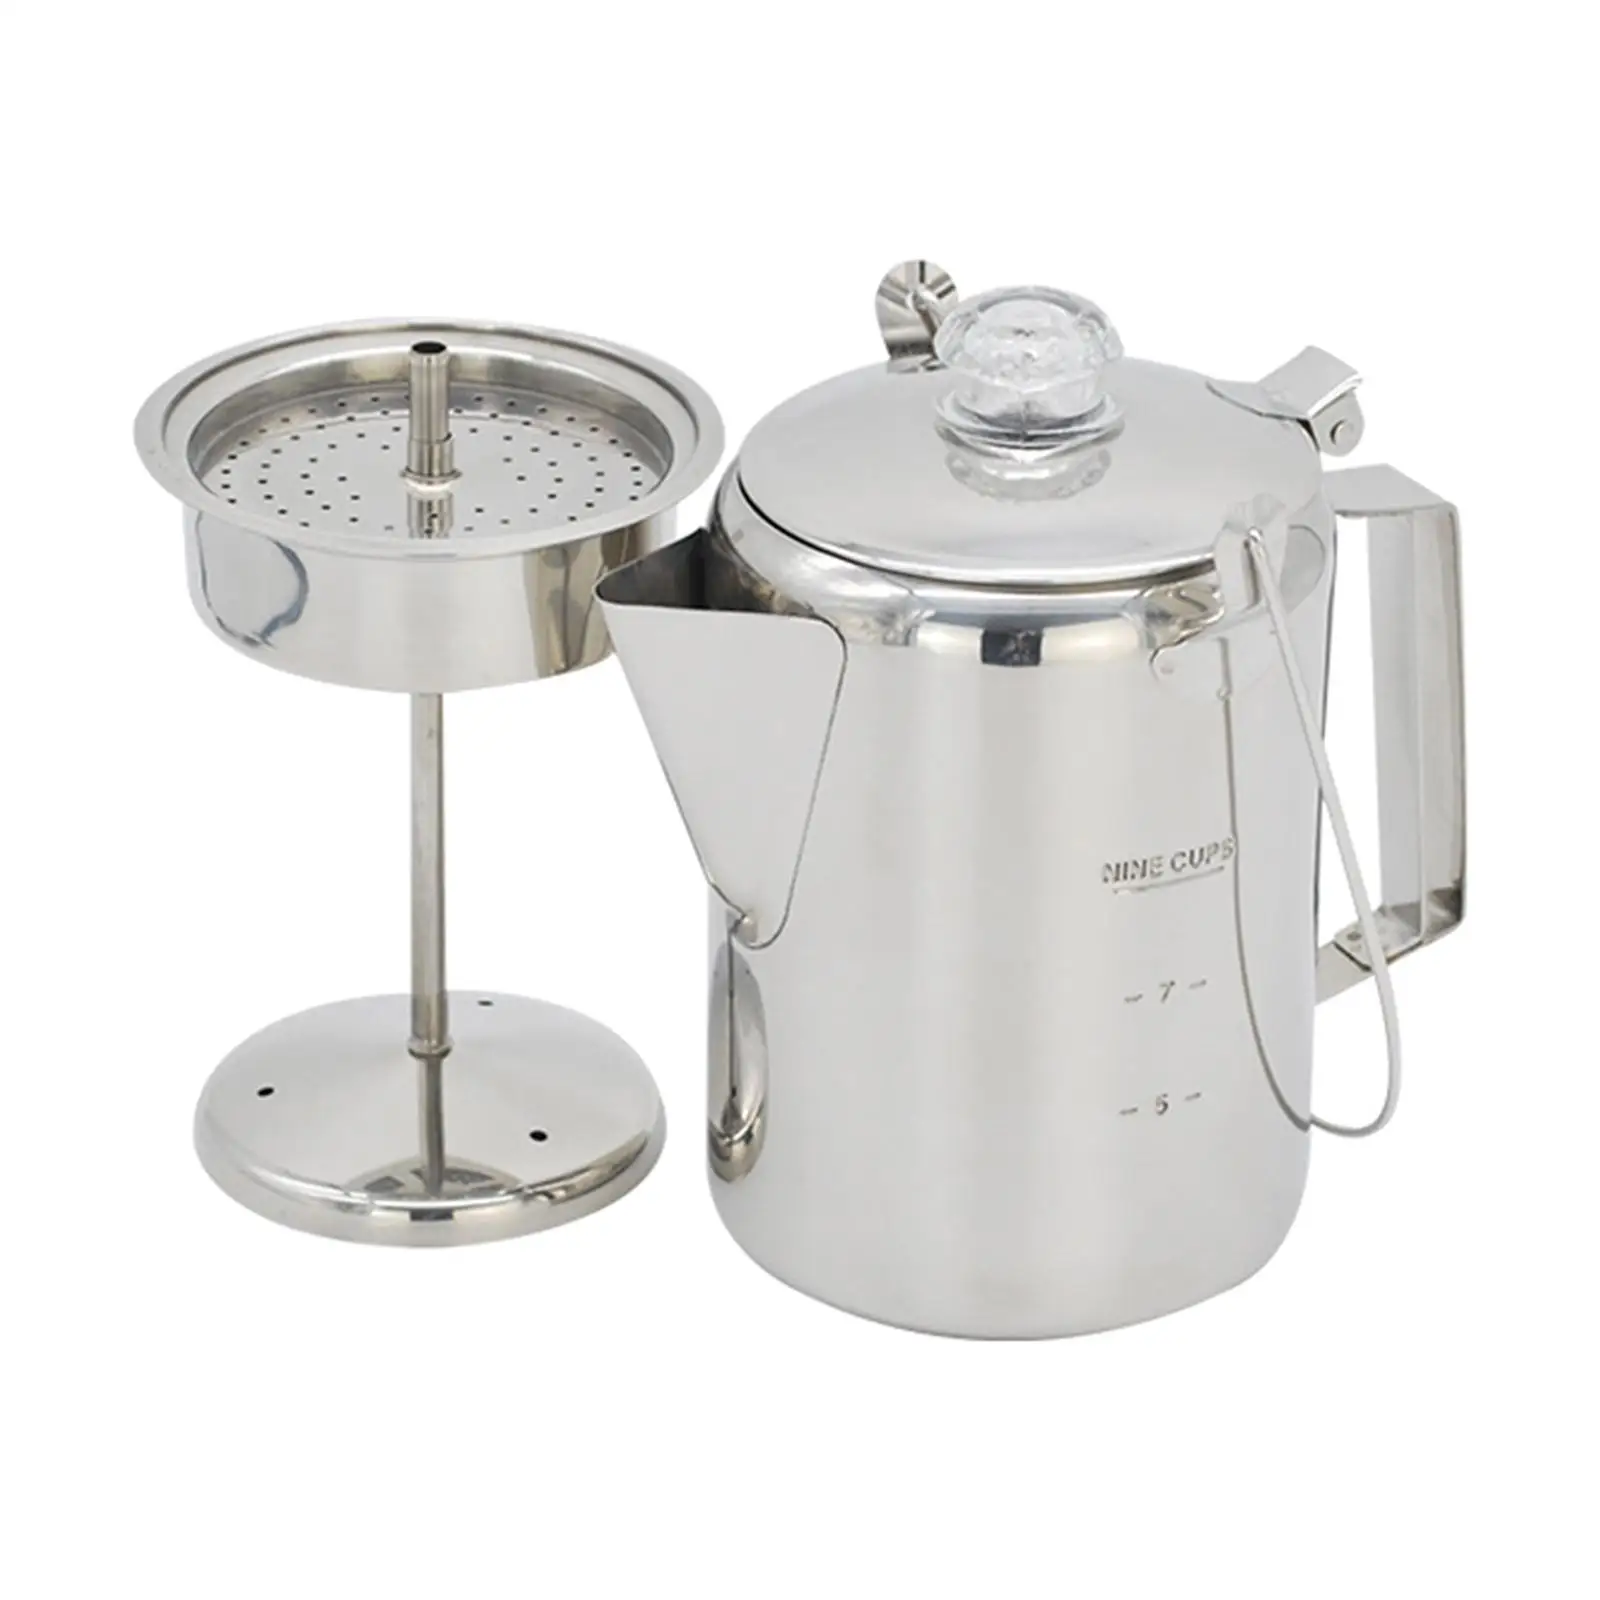 Details about   Outdoor Camping Coffee Pot French Press Cup Mug Cookware Travel Hiking Trekking